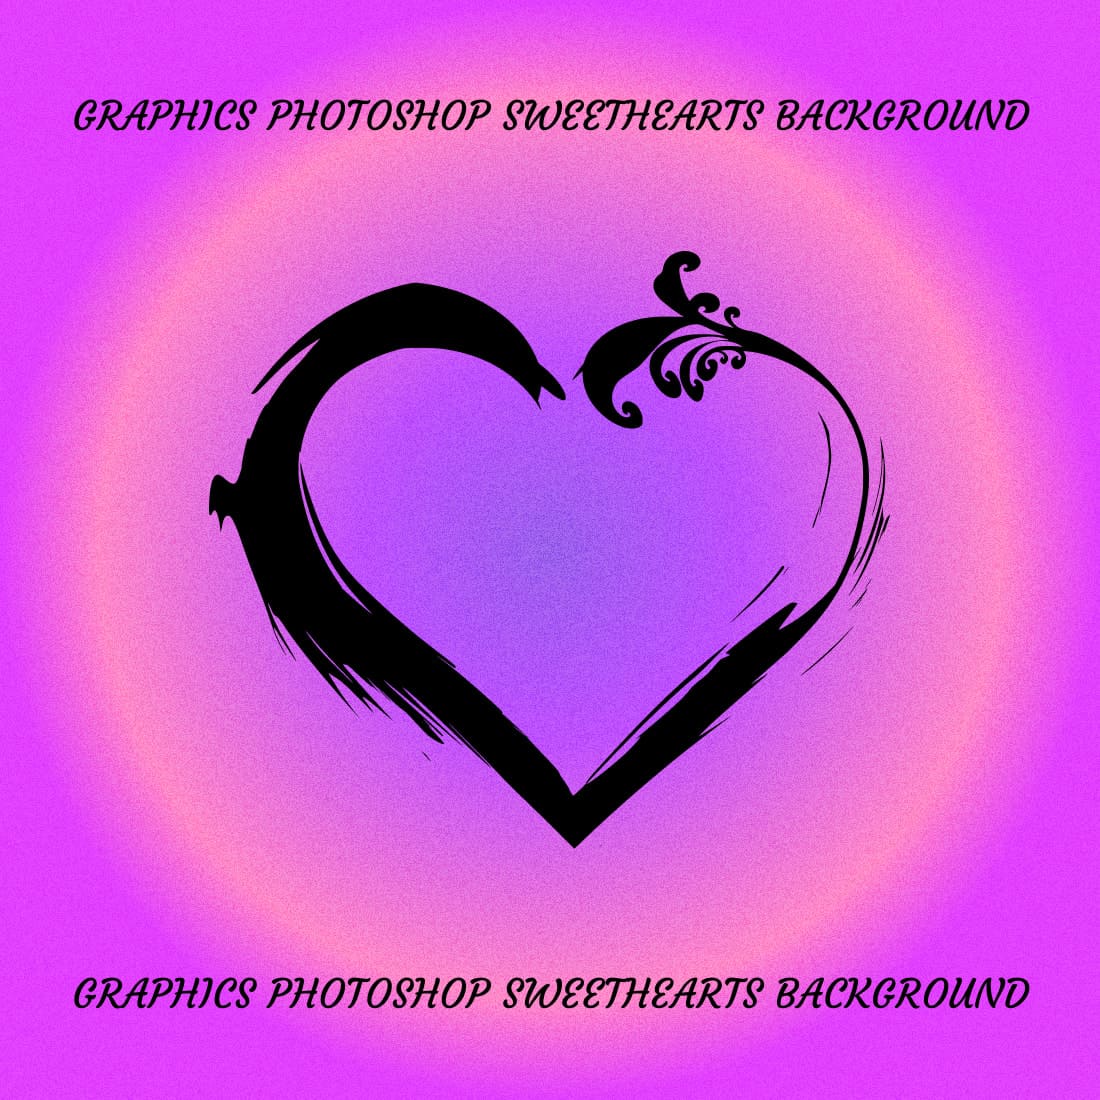 Graphics Photoshop Sweethearts Background - Colorful Example.